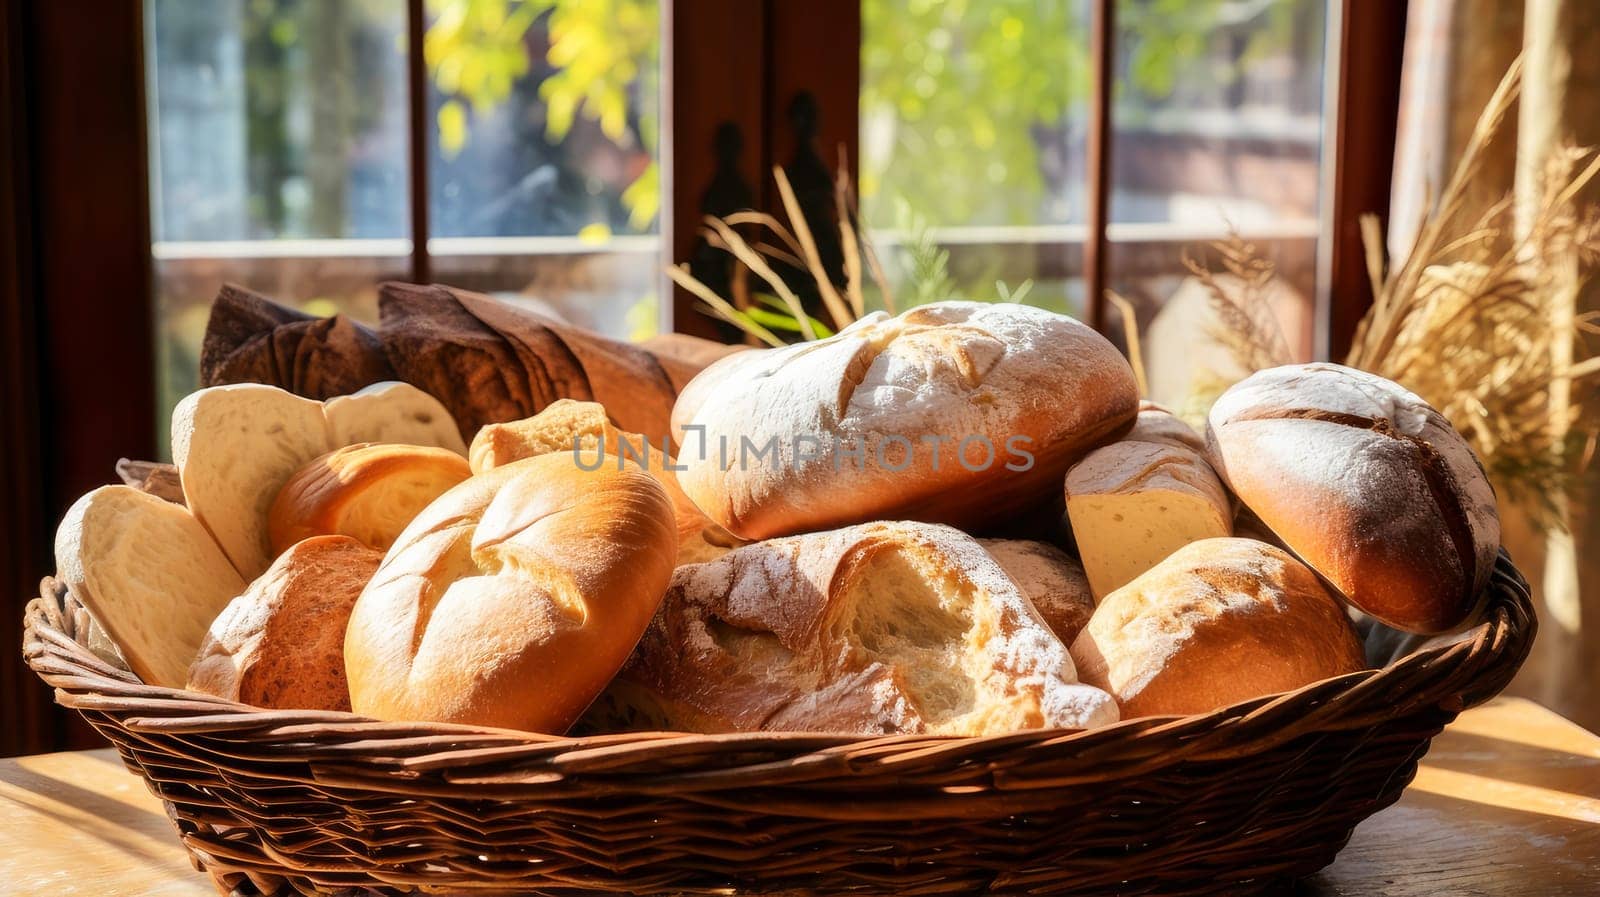 A basket of fresh bread is on the table, on a wooden surface near the window. Fresh classic pastries. by Alla_Yurtayeva